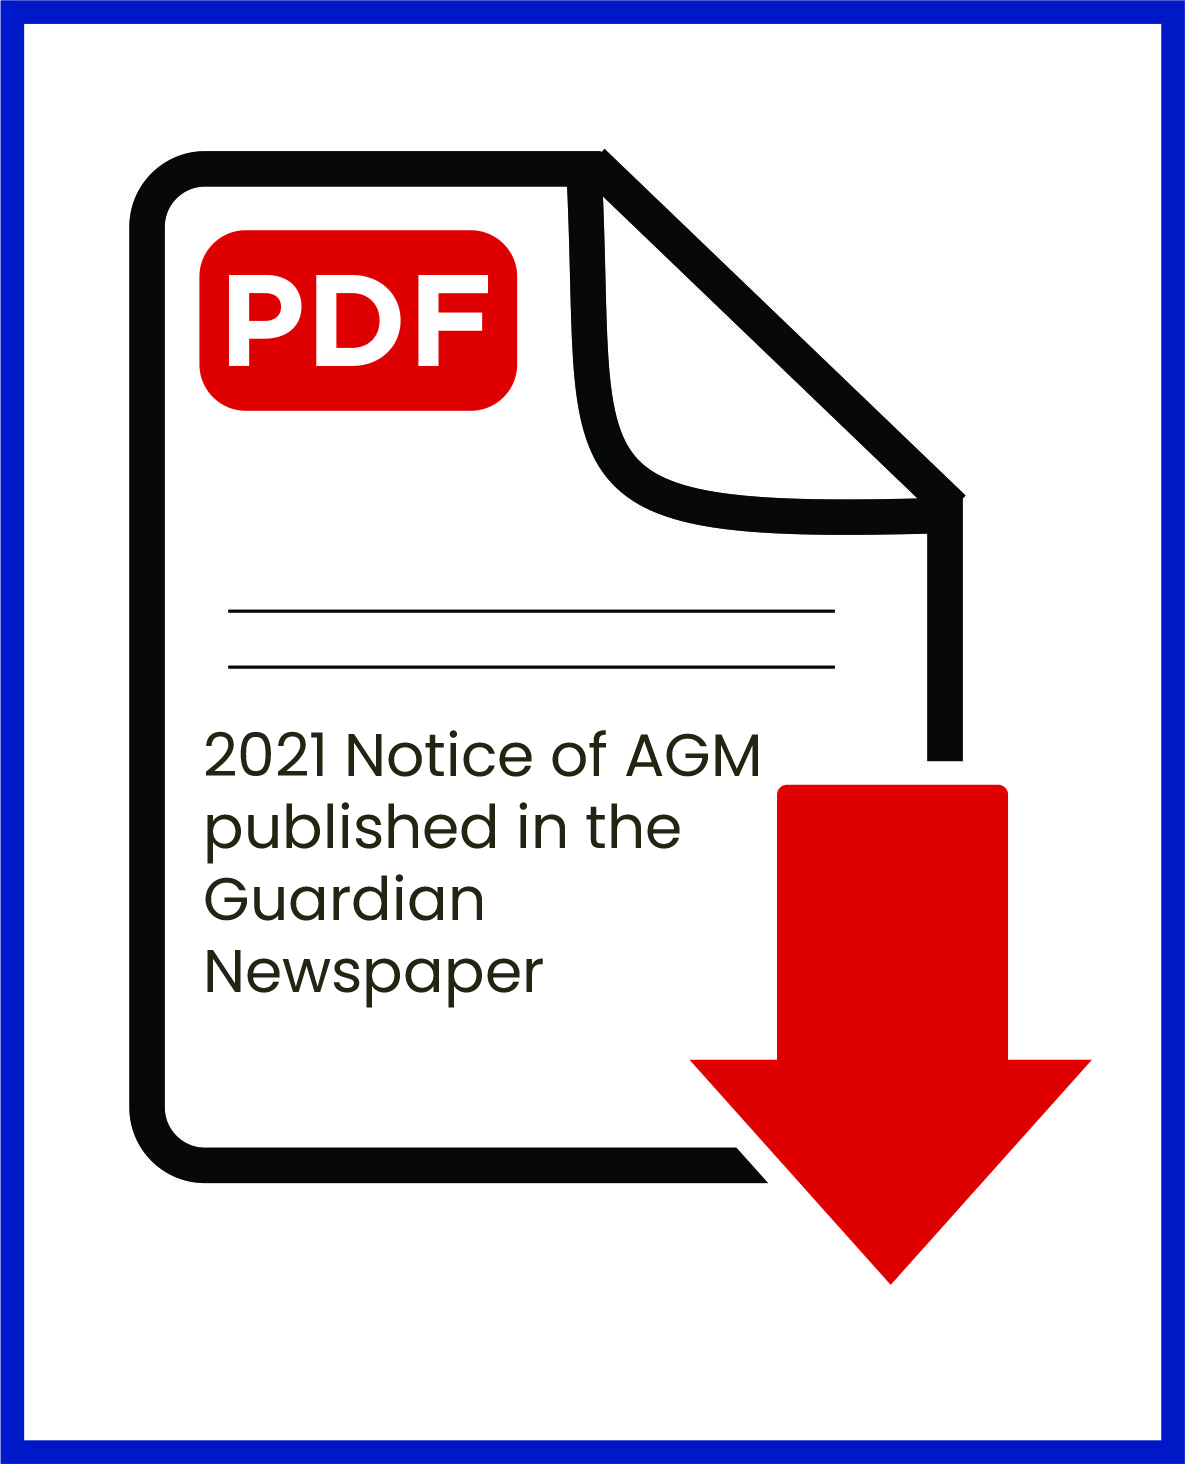 2021 Notice of AGM published in the Guardian Newspaper